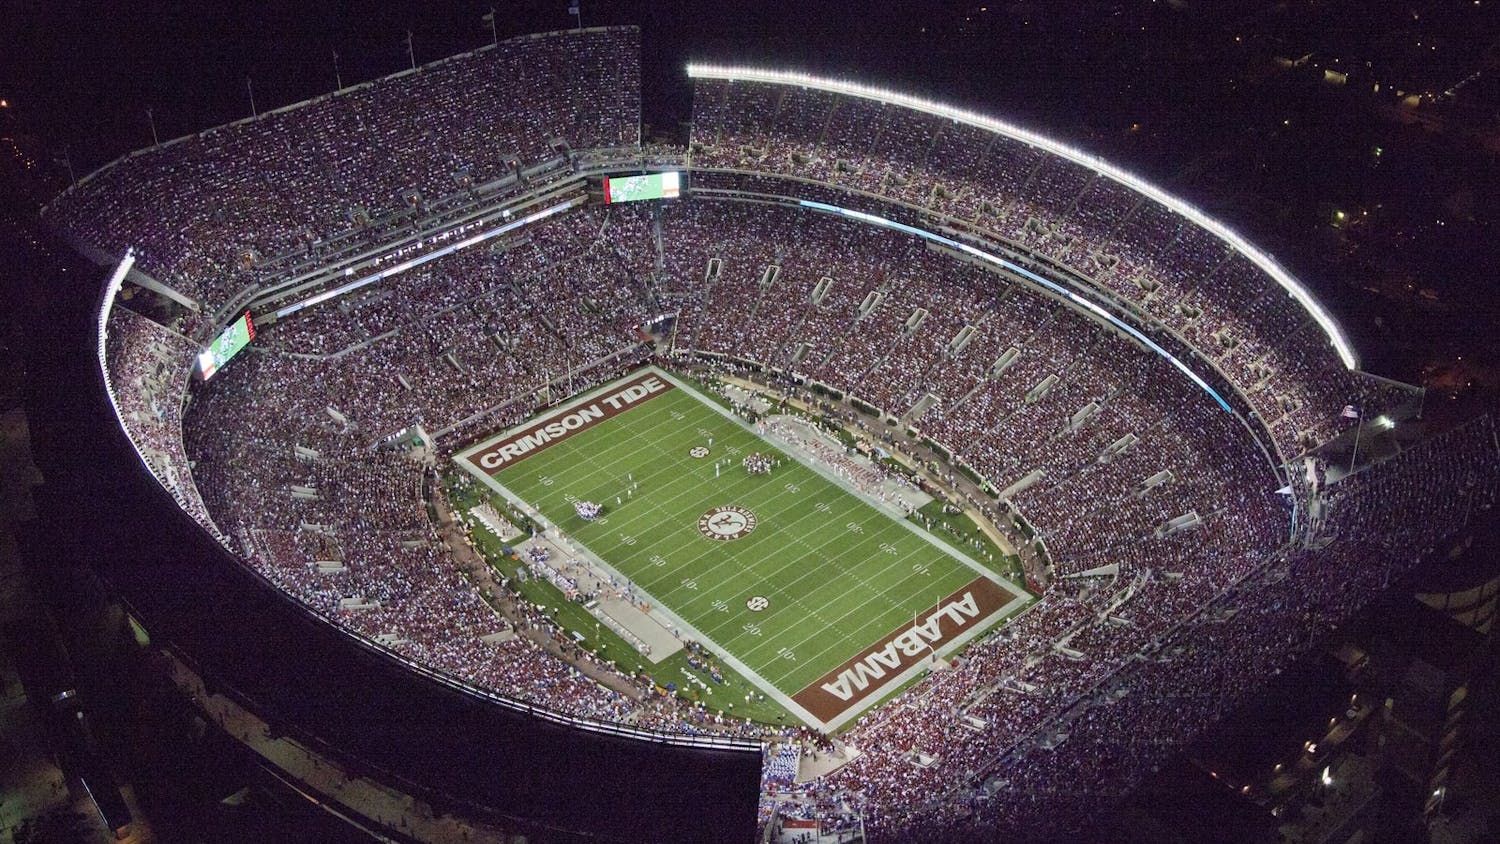  Bryant-Denny Stadium played host to Georgia vs. Alabama last week, one of the biggest games of the season.